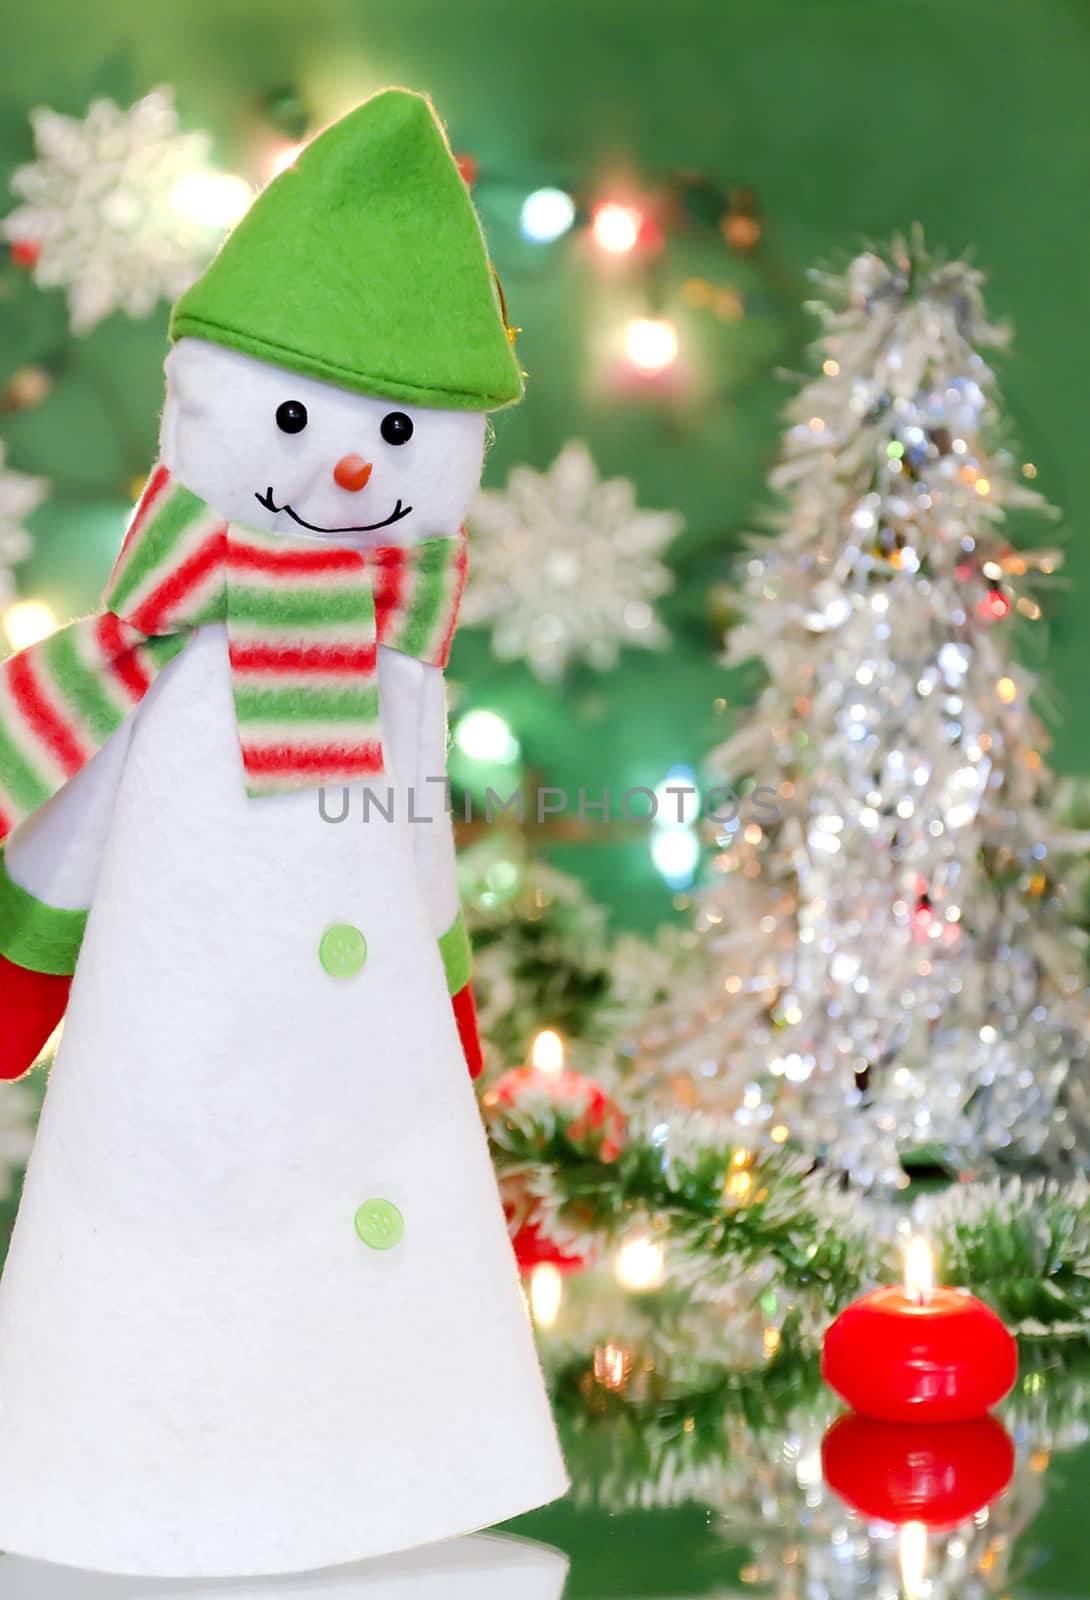 Christmas new year decoration with a toy - snowman, candles and lights of garlands on a green background